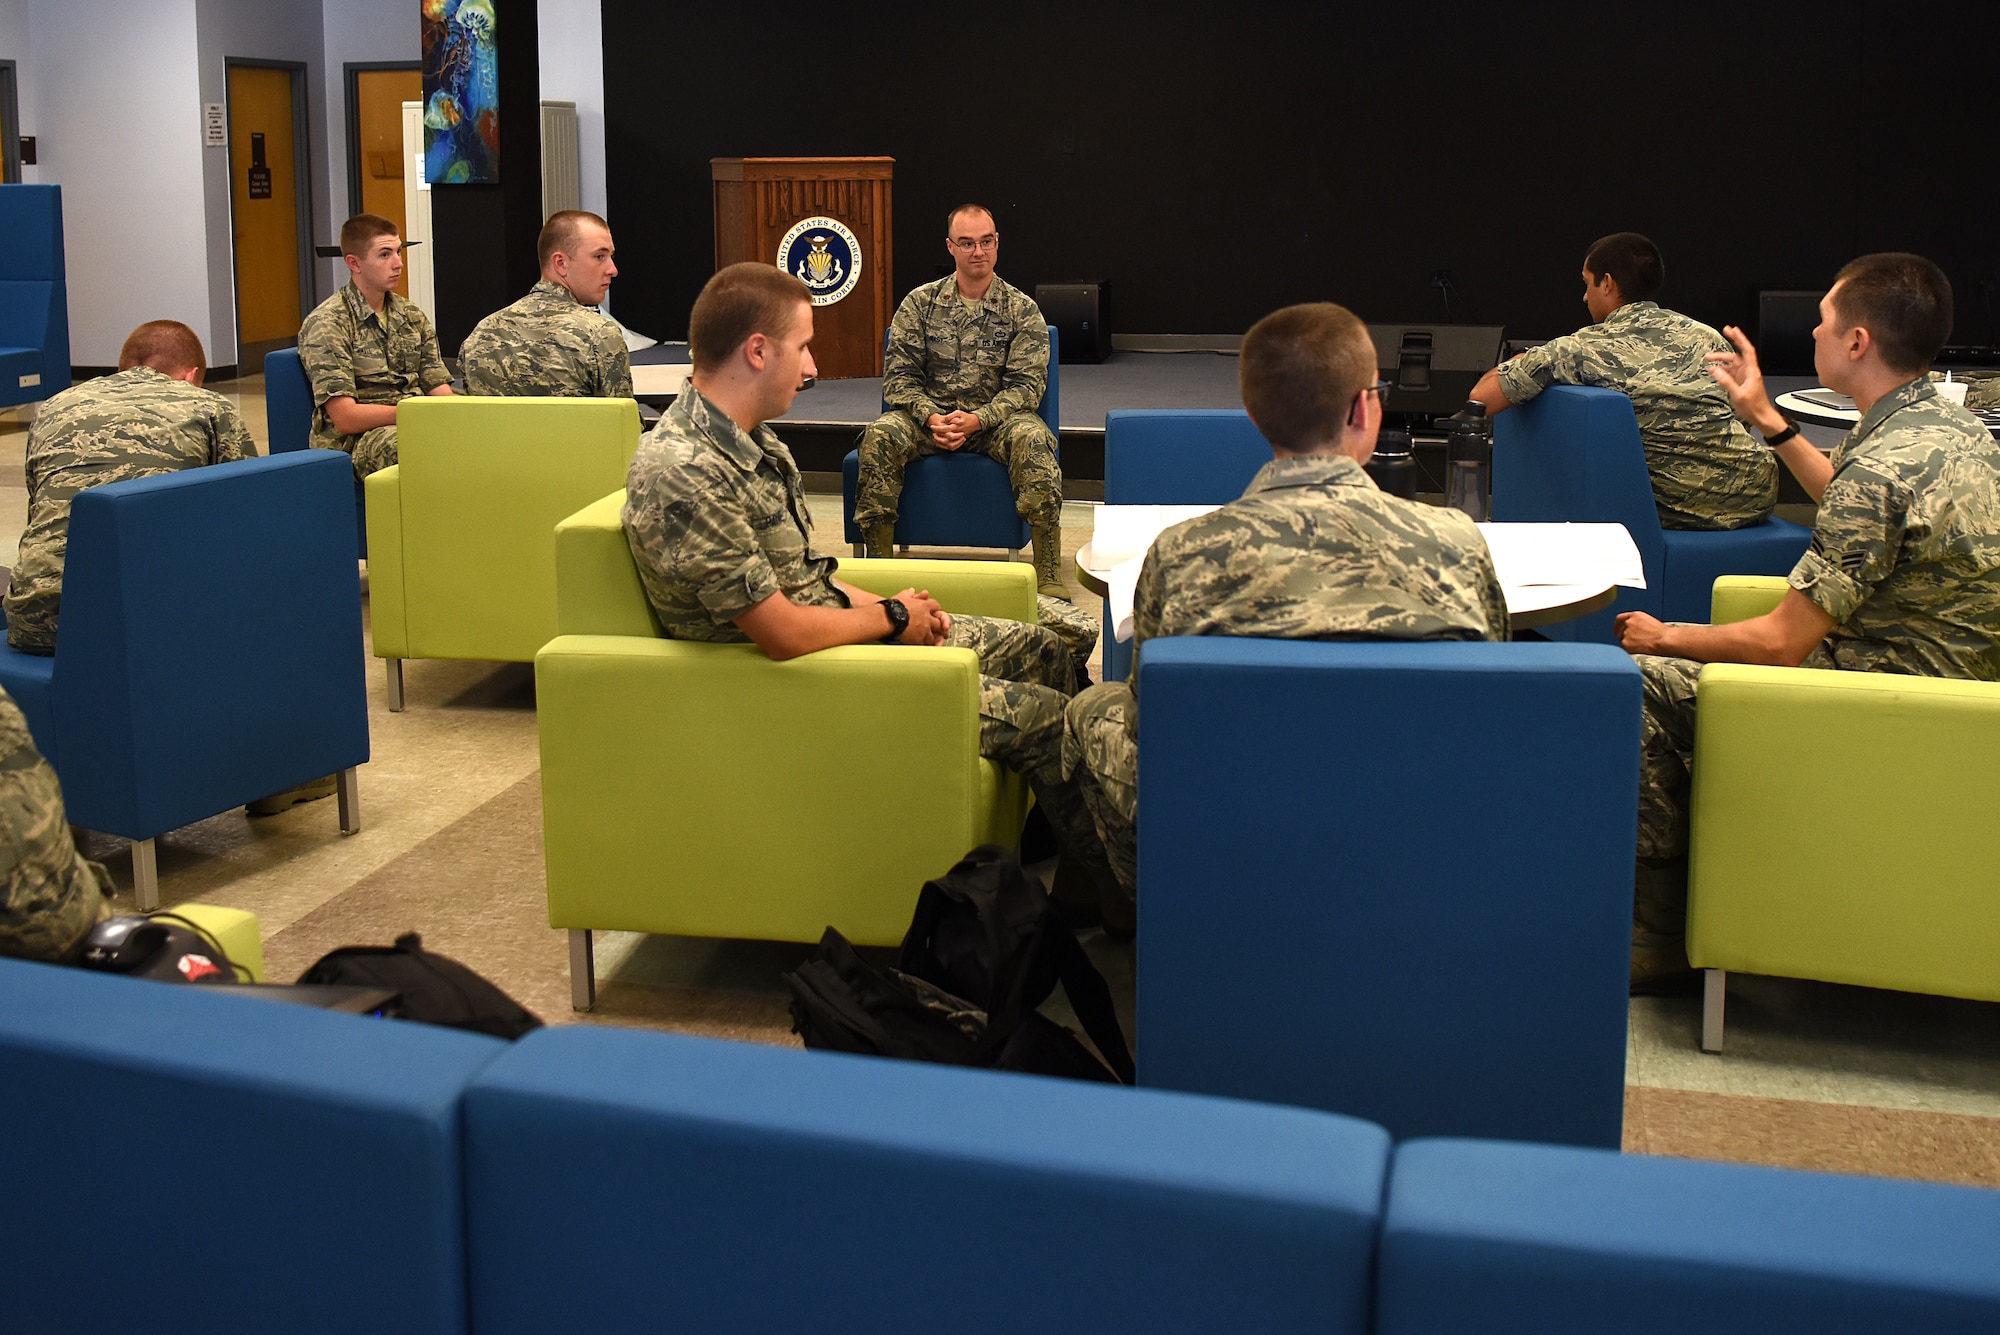 U.S. Air Force Maj. John Nagy, 336th Training Squadron director of operations, talks to Airmen from the 336th TRS inside the Levitow Training Support Facility on Keesler Air Force Base, Mississippi, Sept. 12, 2019. The 336th TRS revamped their Awaiting Further Instruction program and turned it into a multi-tracked program that prepares Airmen for life in the Air Force. (U.S. Air Force photo by Senior Airman Suzie Plotnikov)